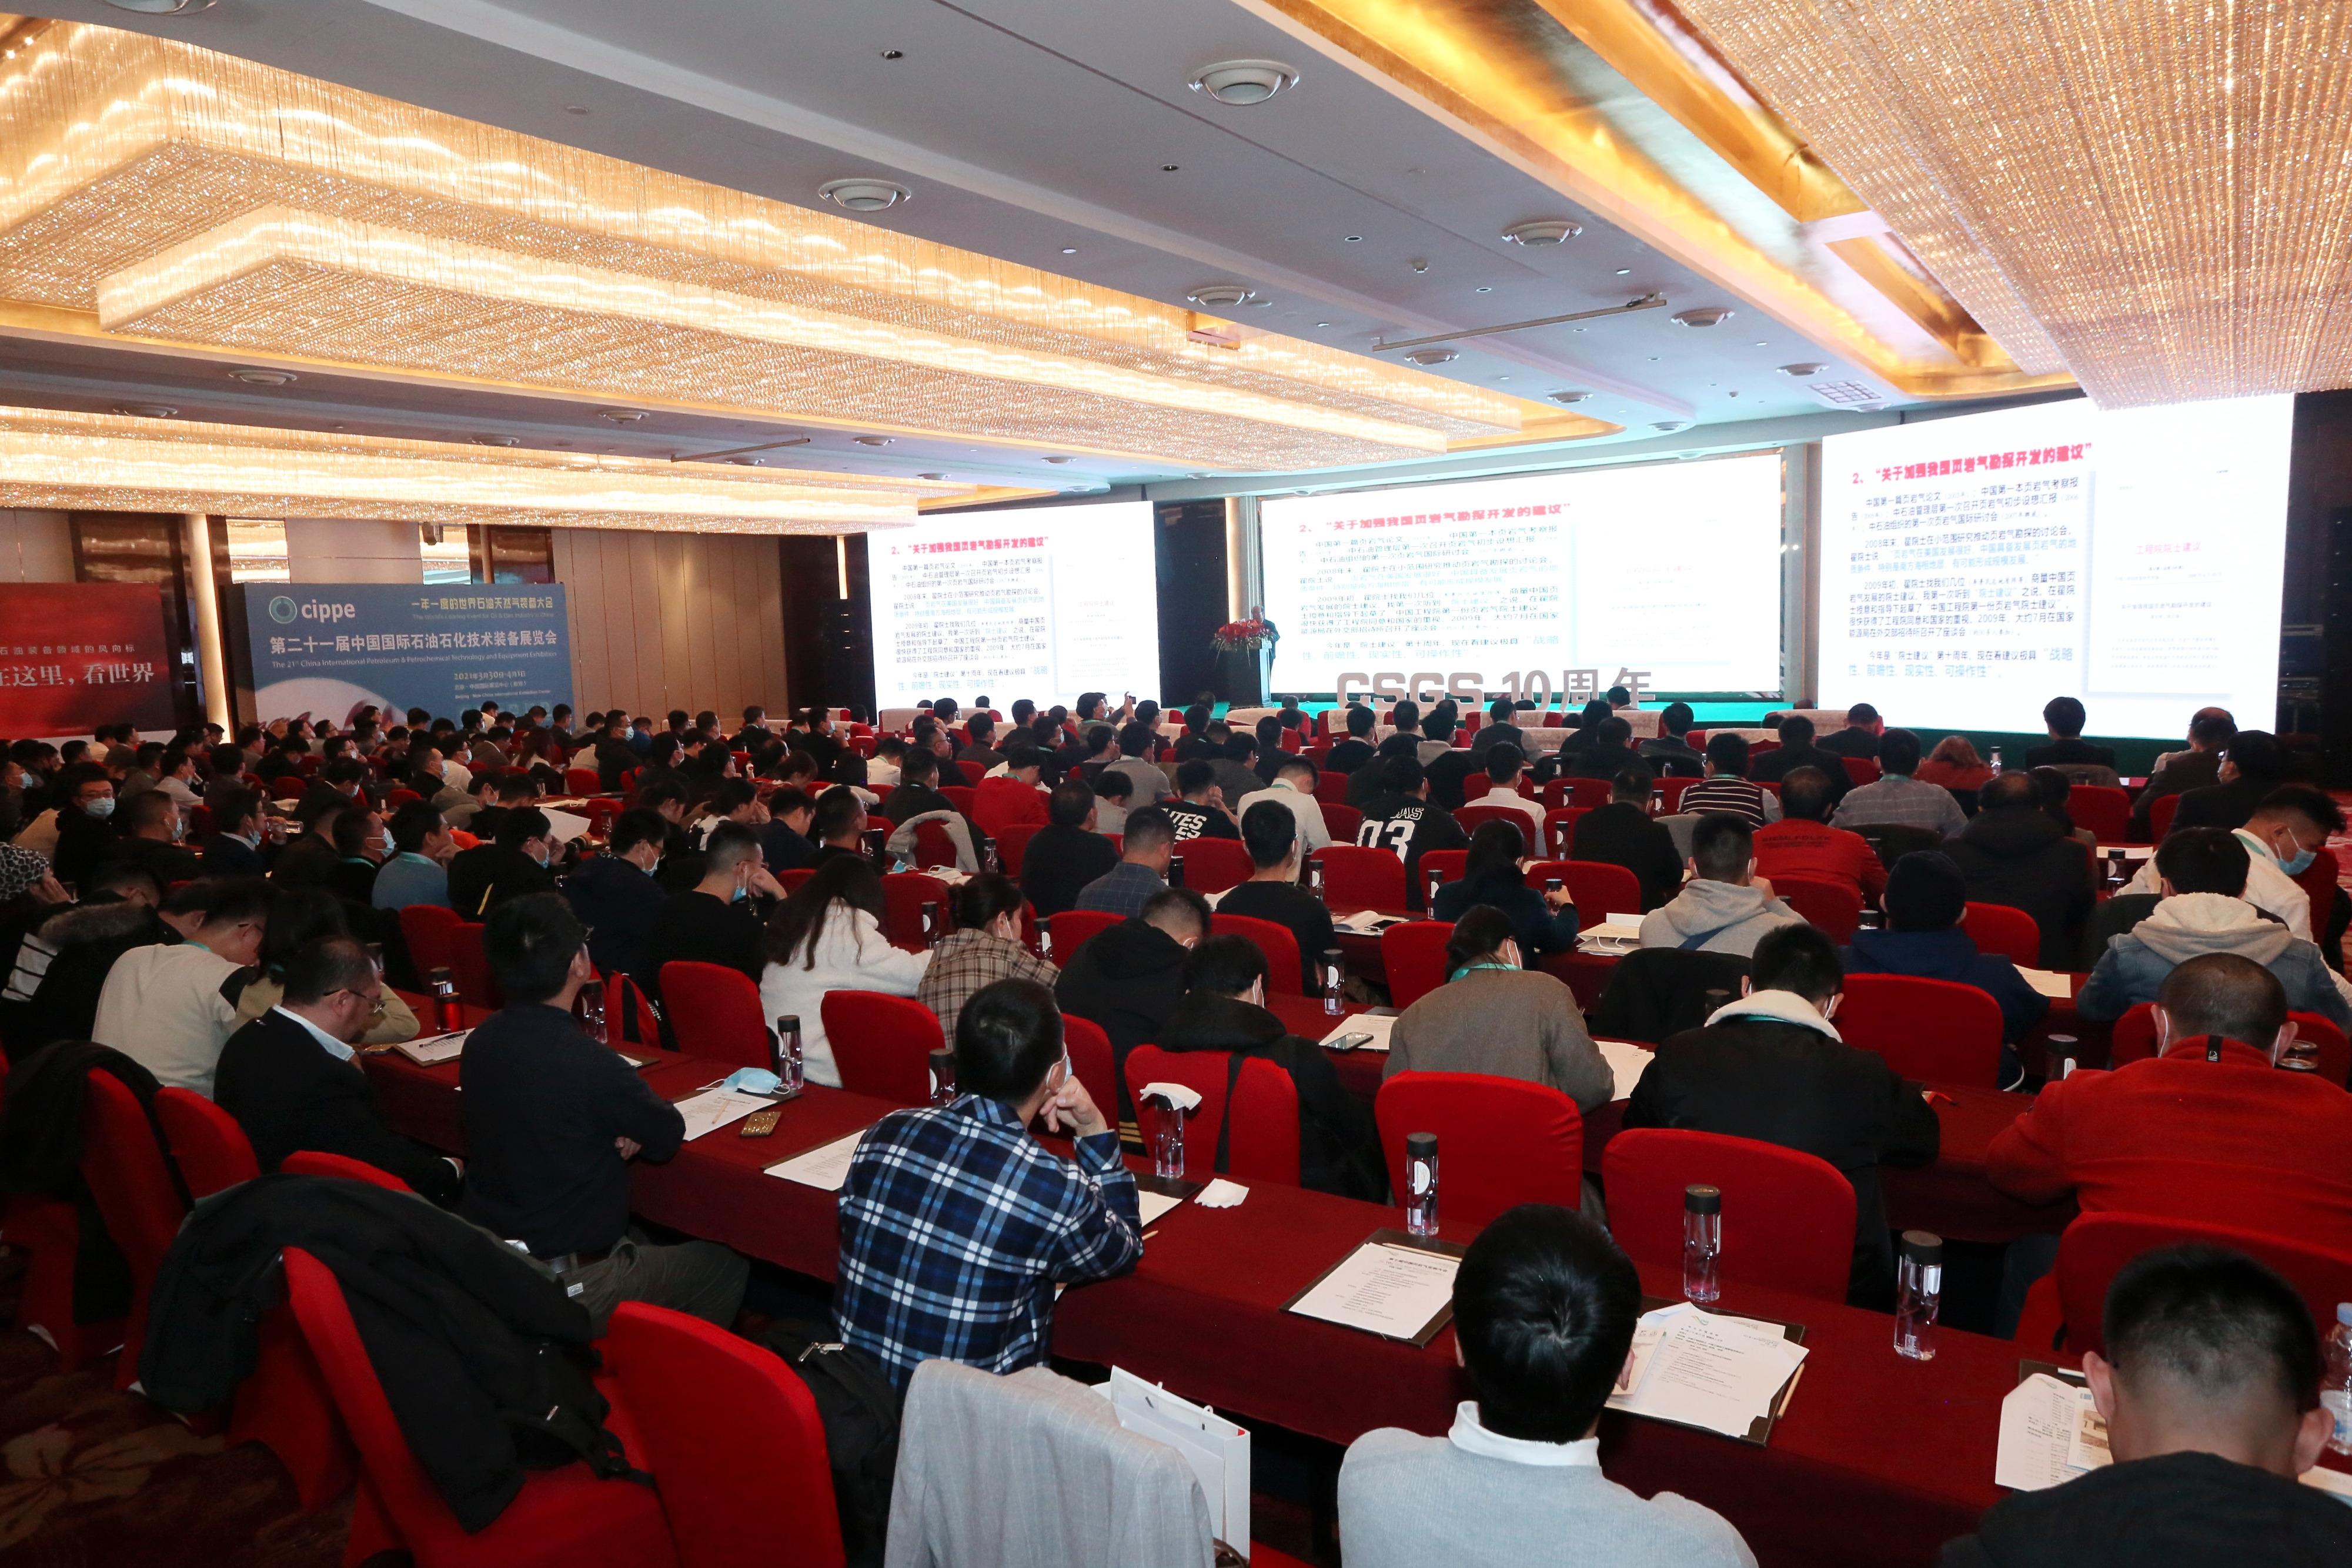 Meet in Chengdu, explore development together - SOTEC Environmental Protection participated in the 10th China Shale Gas